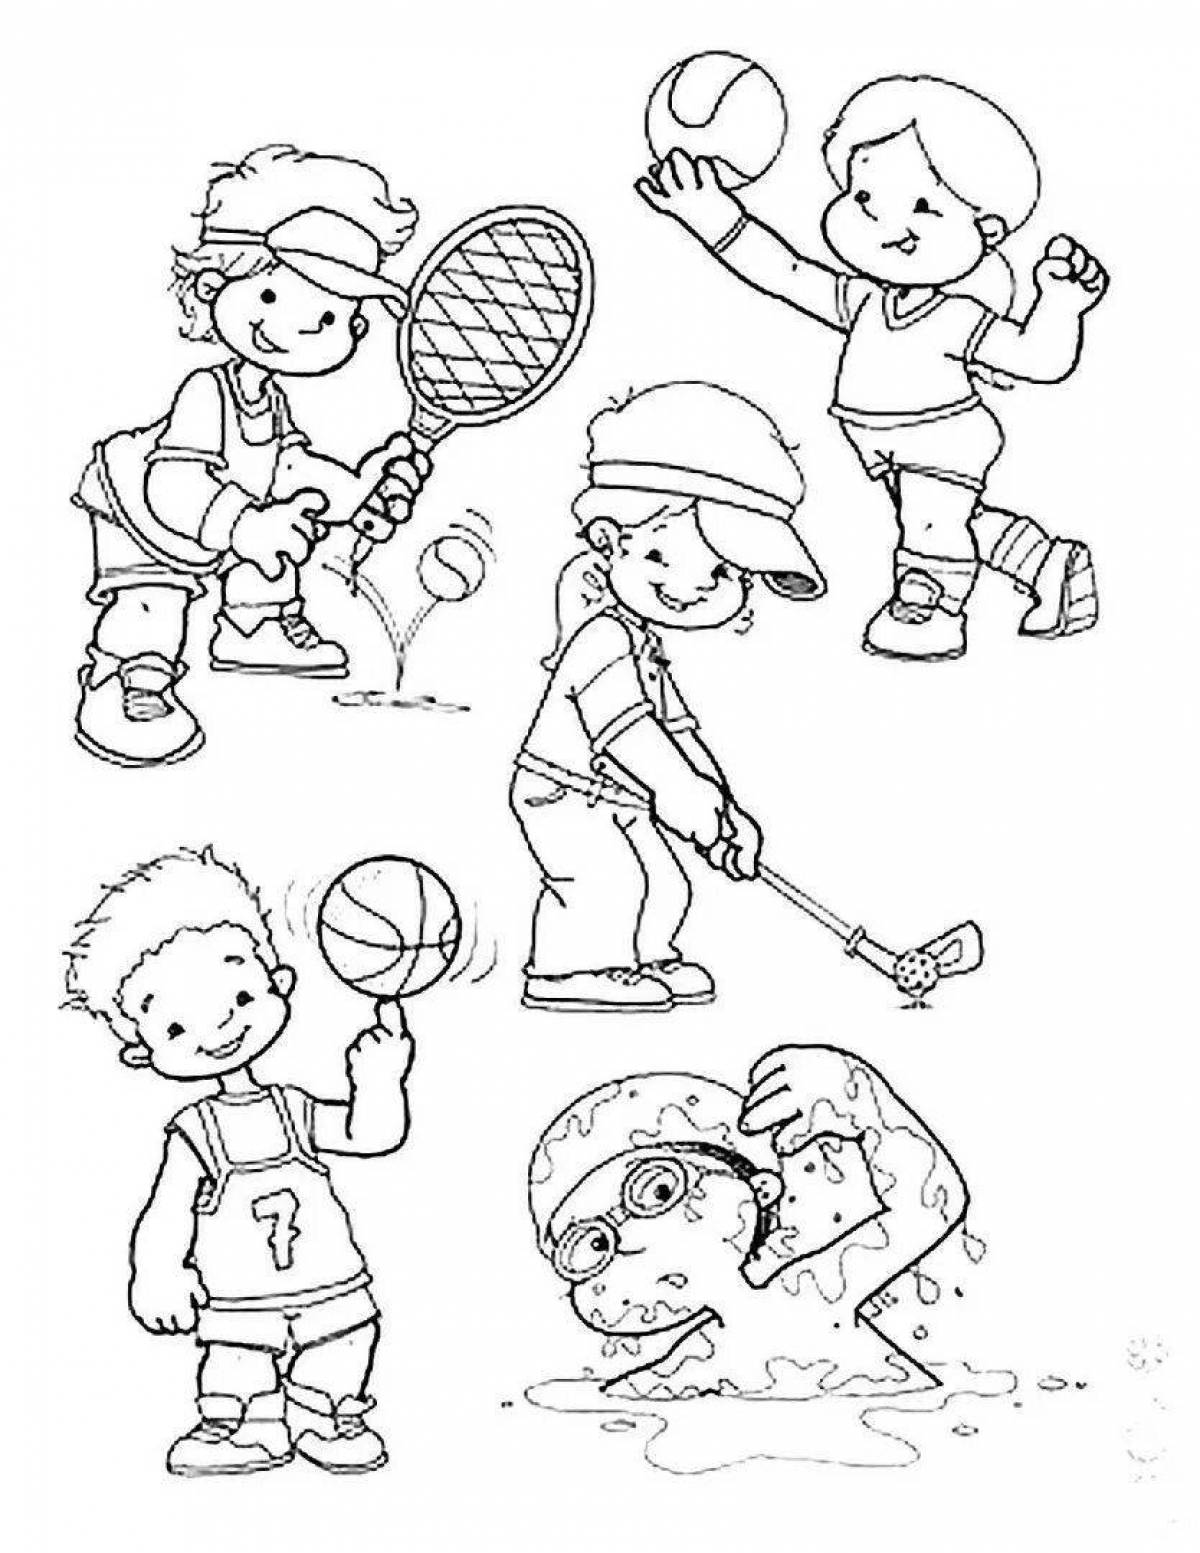 About sports and healthy lifestyle for children #12